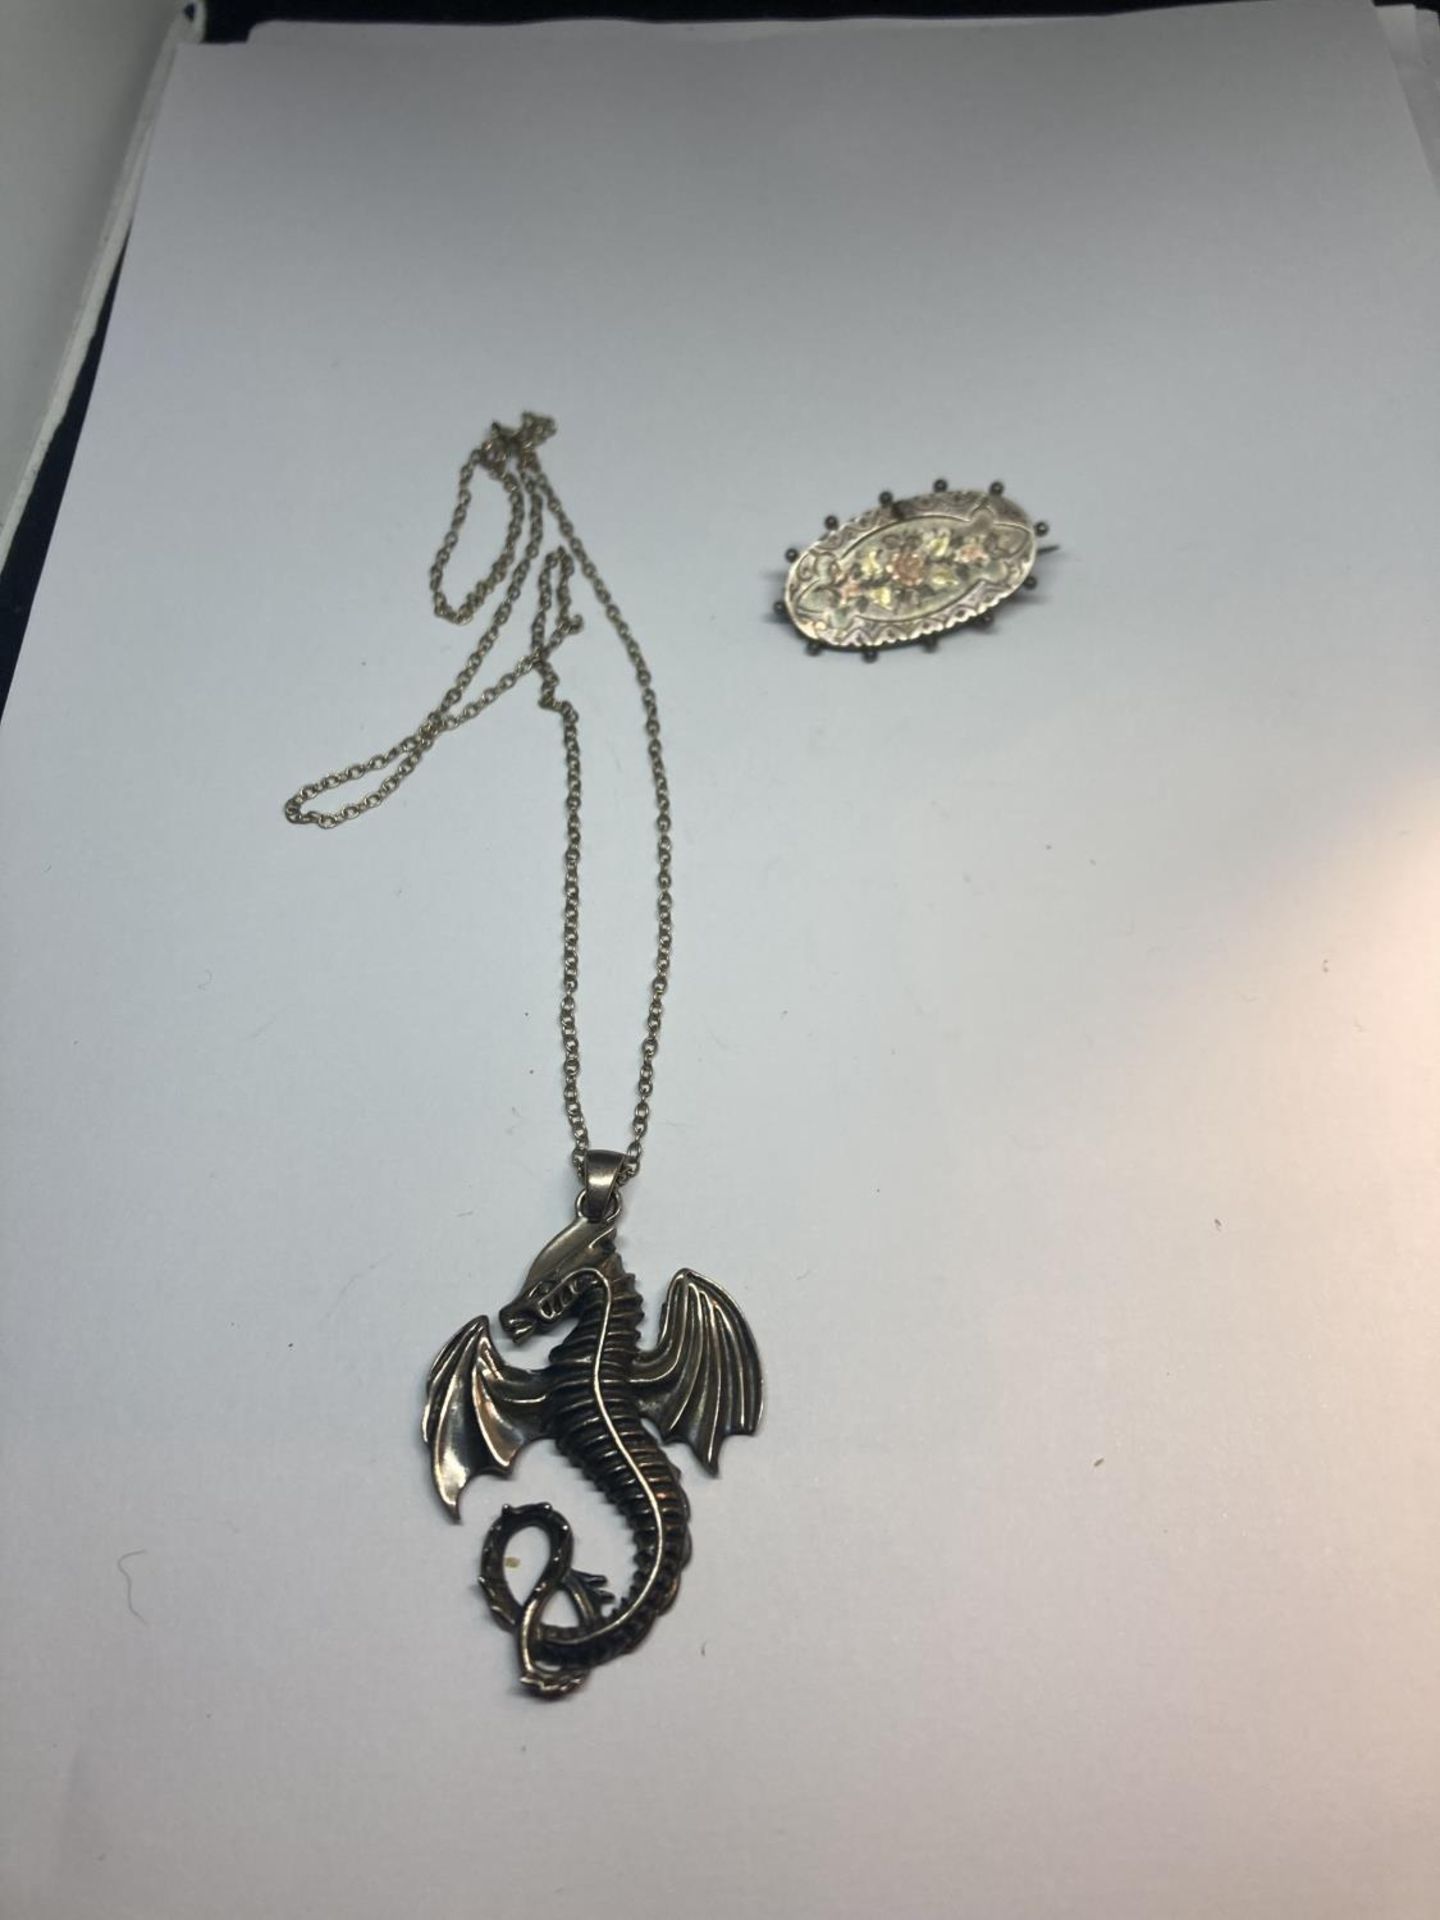 A SILVER NECKLACE WITH AN AMPHIPTERE PENDANT AND A VINTAGE SILVER BROOCH WITH FLORAL DECORATION